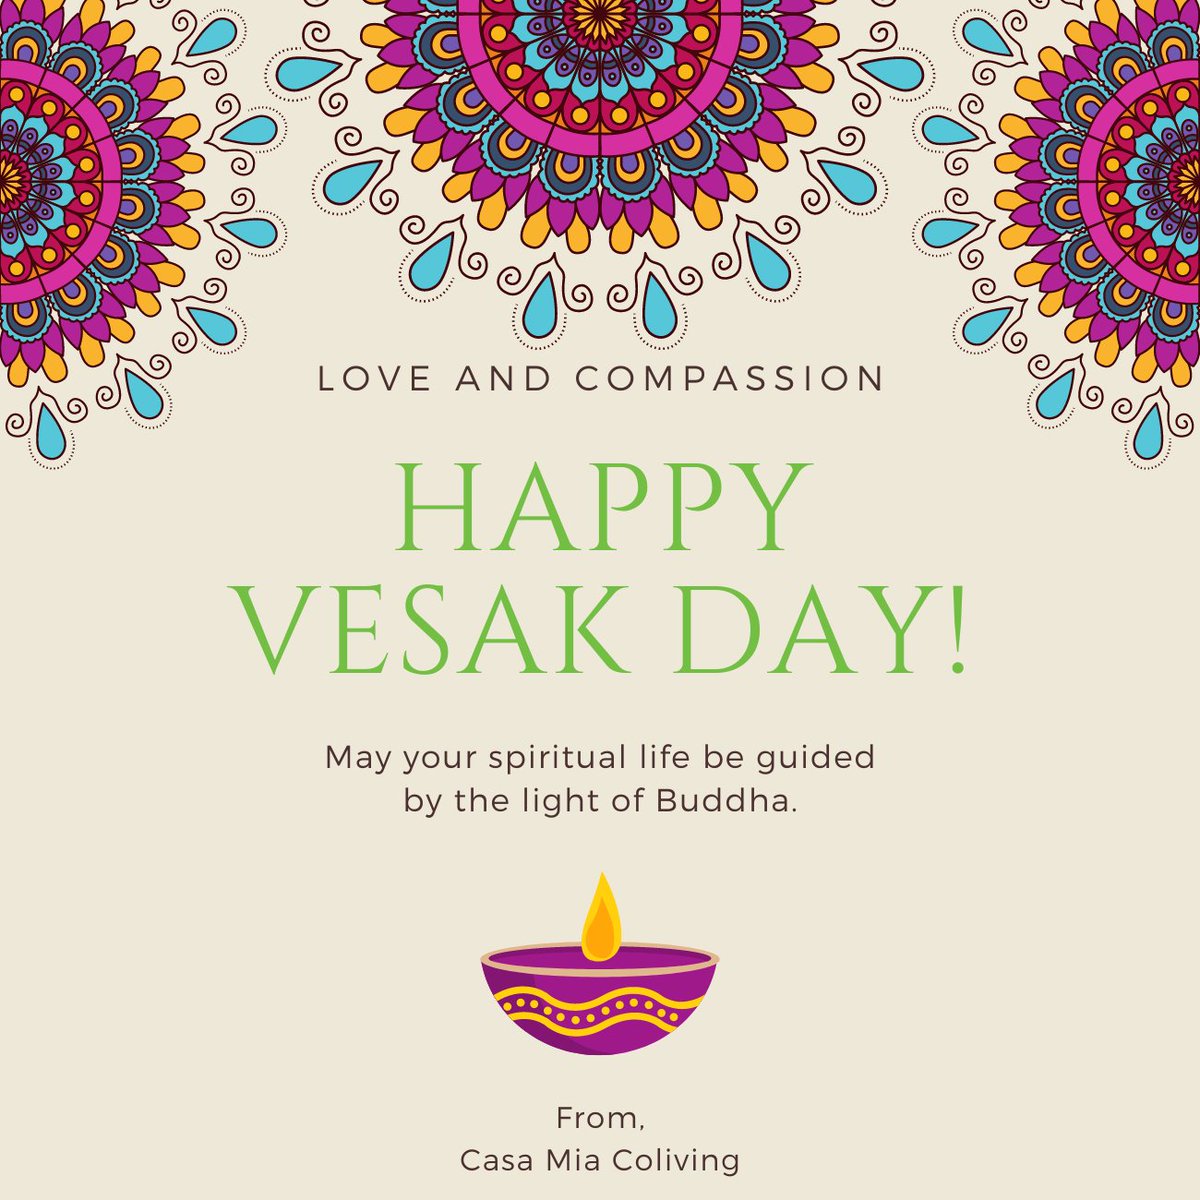 Happy Vesak Day from Casa Mia Coliving! May your life be filled with happiness and contentment 🪔🪷

#vesakday #vesak #coliving #community #singapore